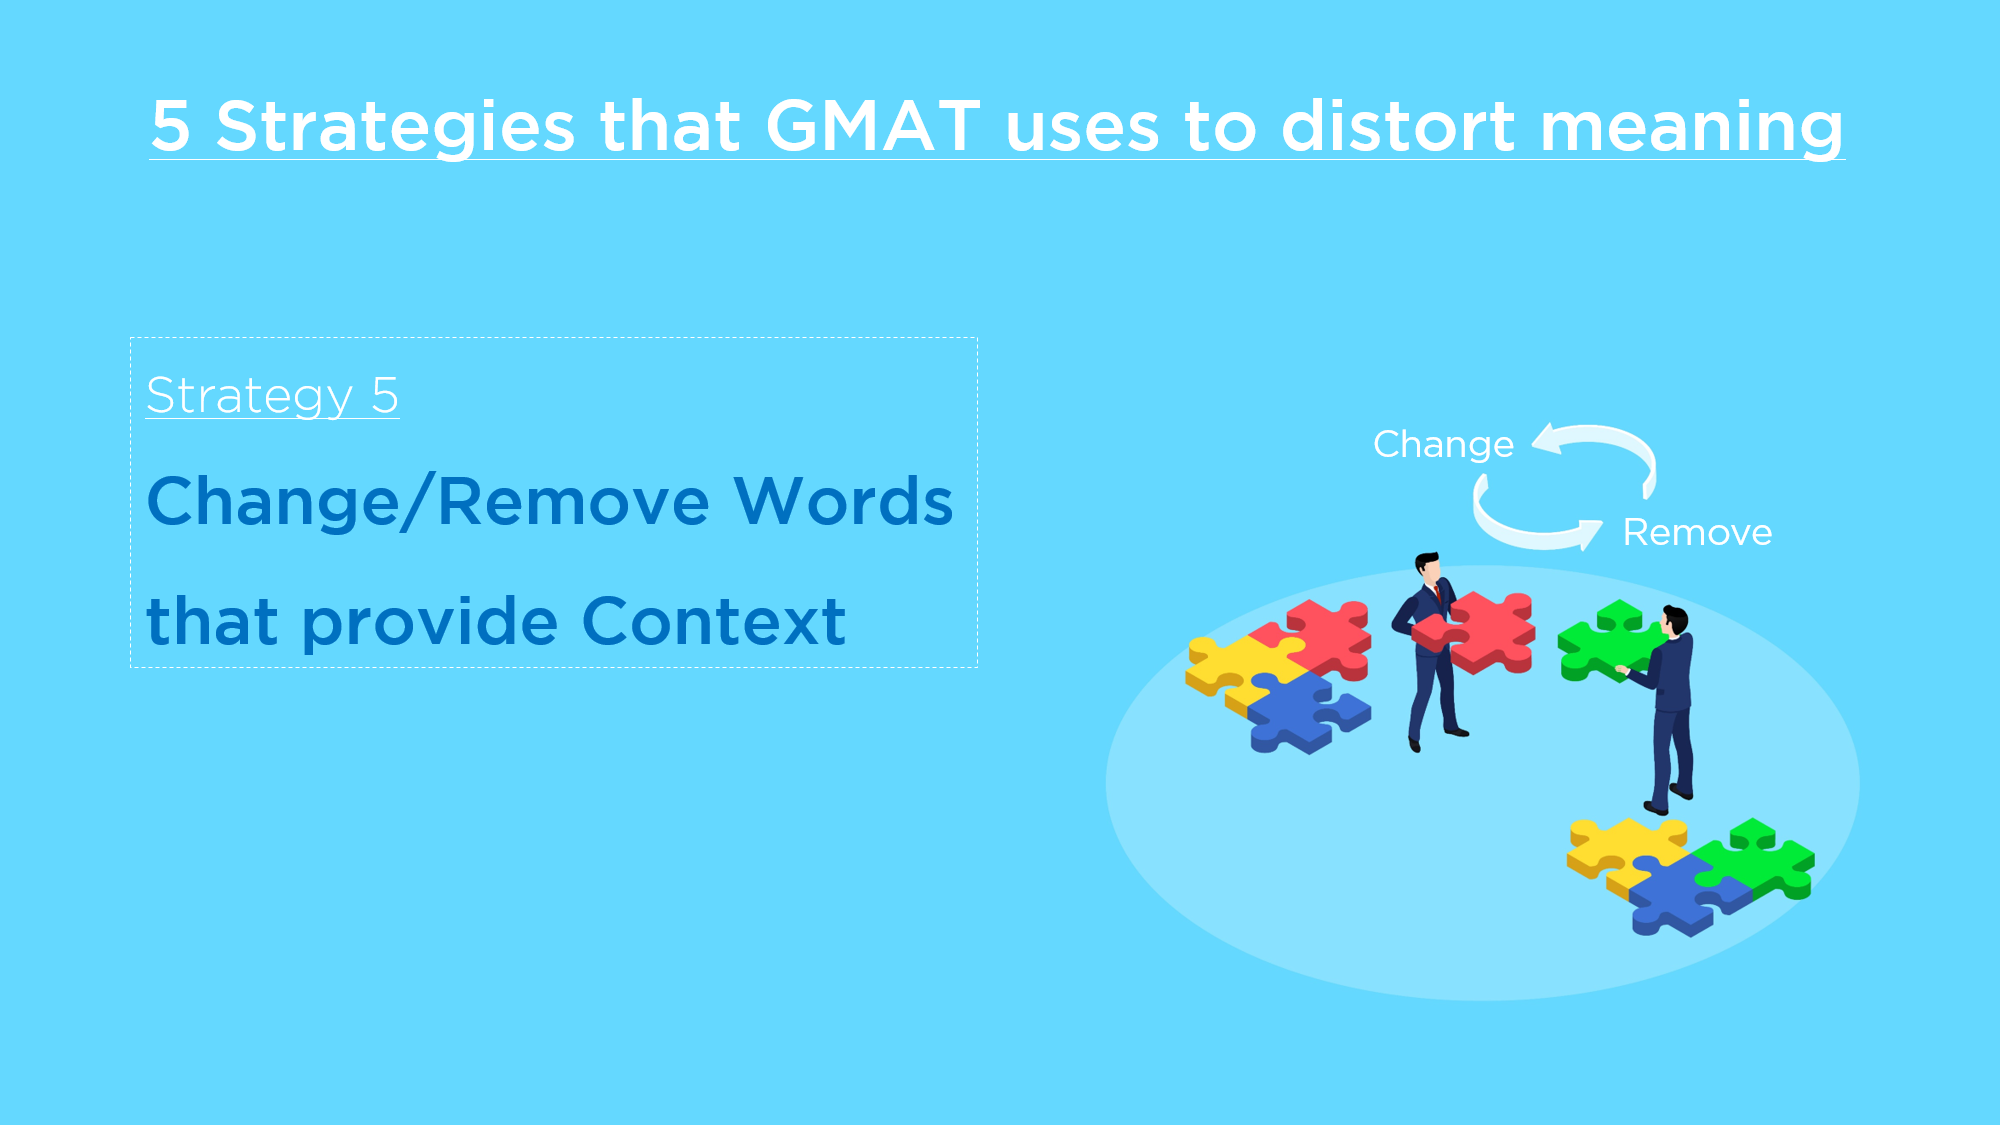 GMAT Meaning - Change:Remove Words that provide Context